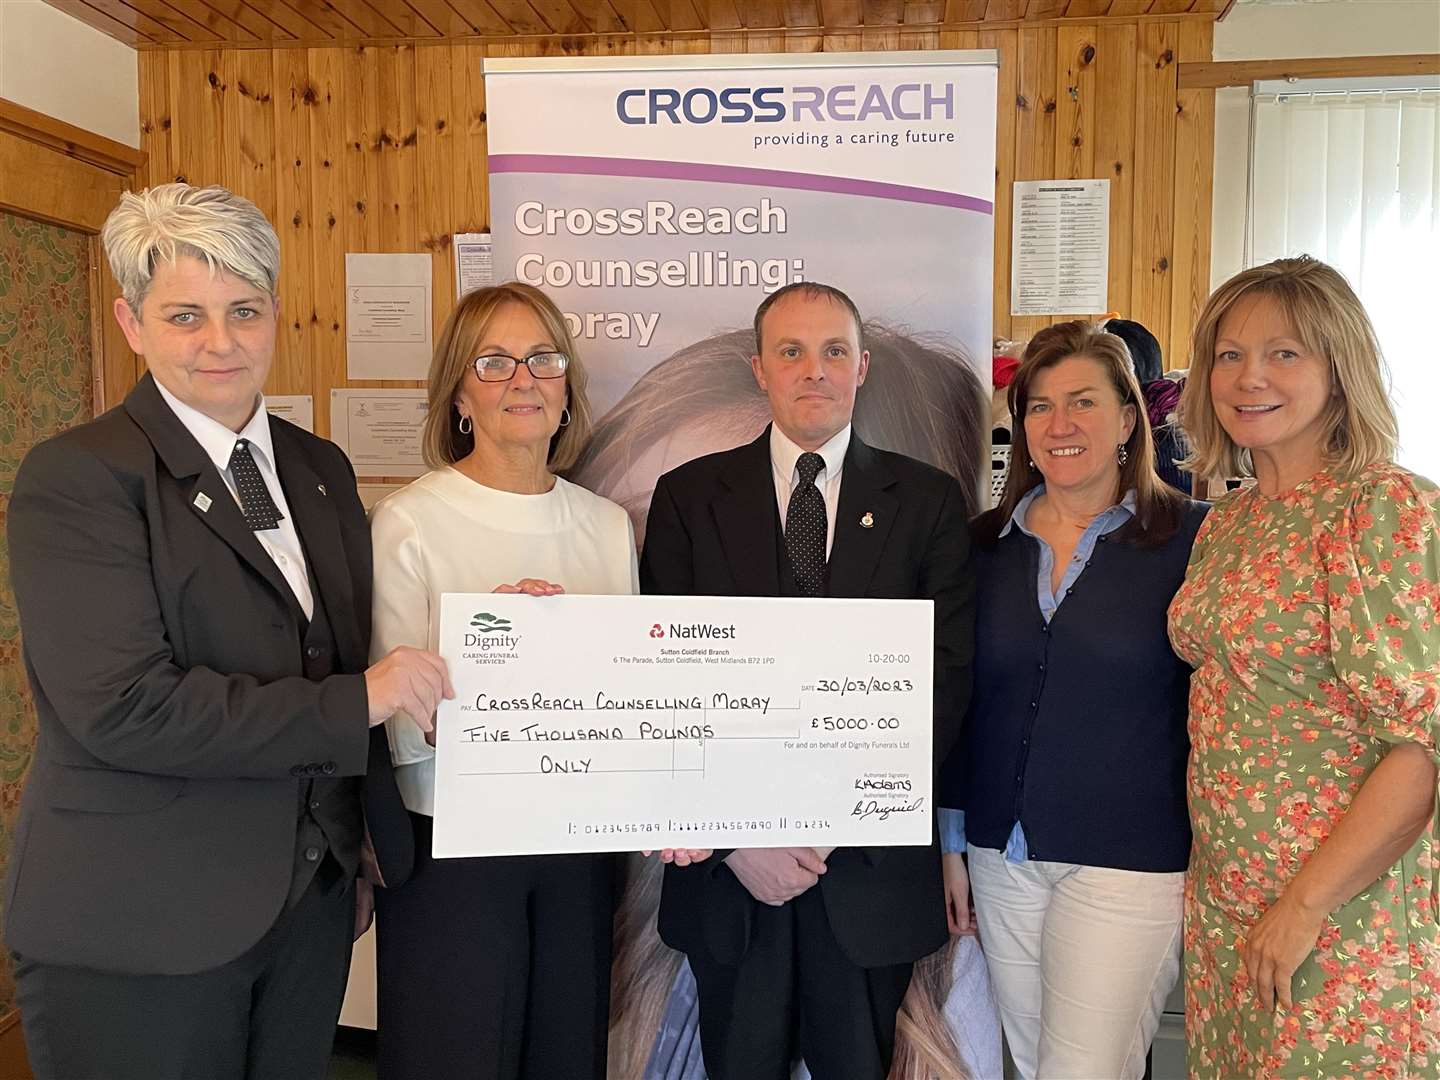 Caroline Duguid (left) and David Guthrie (middle) from William Mair presented the CrossReach team with the £5,000 cheque.